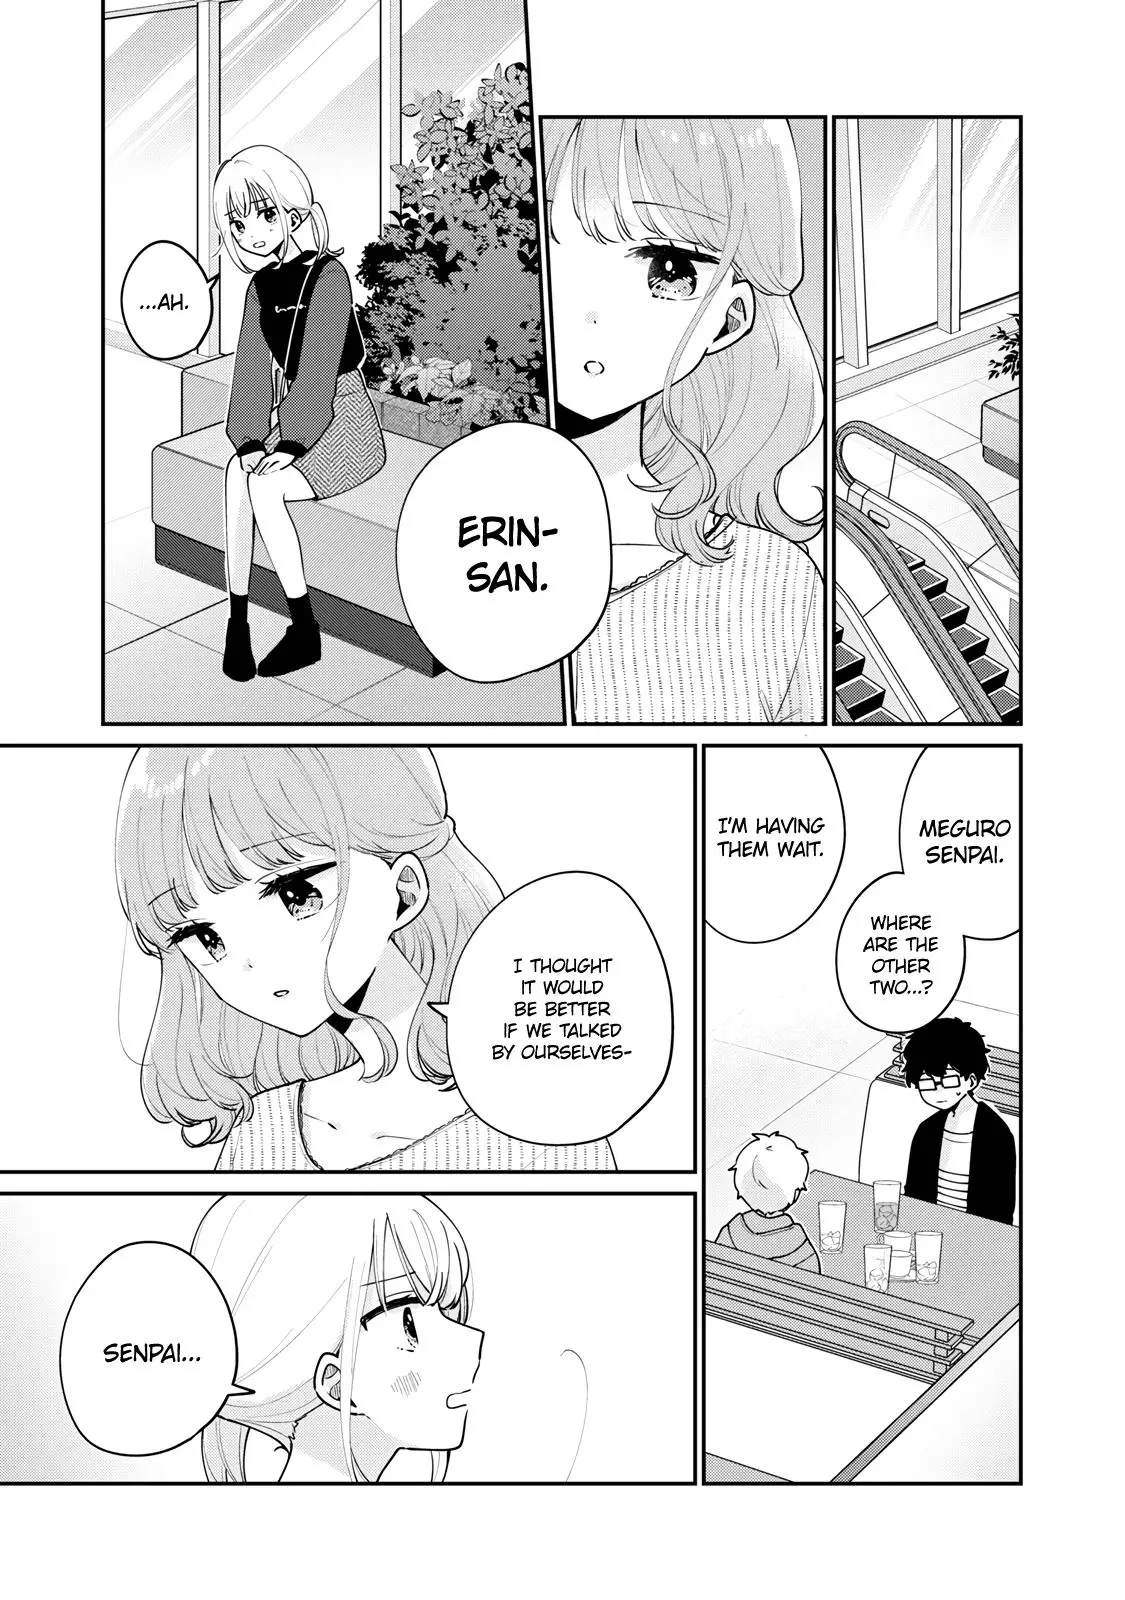 It's Not Meguro-San's First Time - 56 page 2-a640f2ea